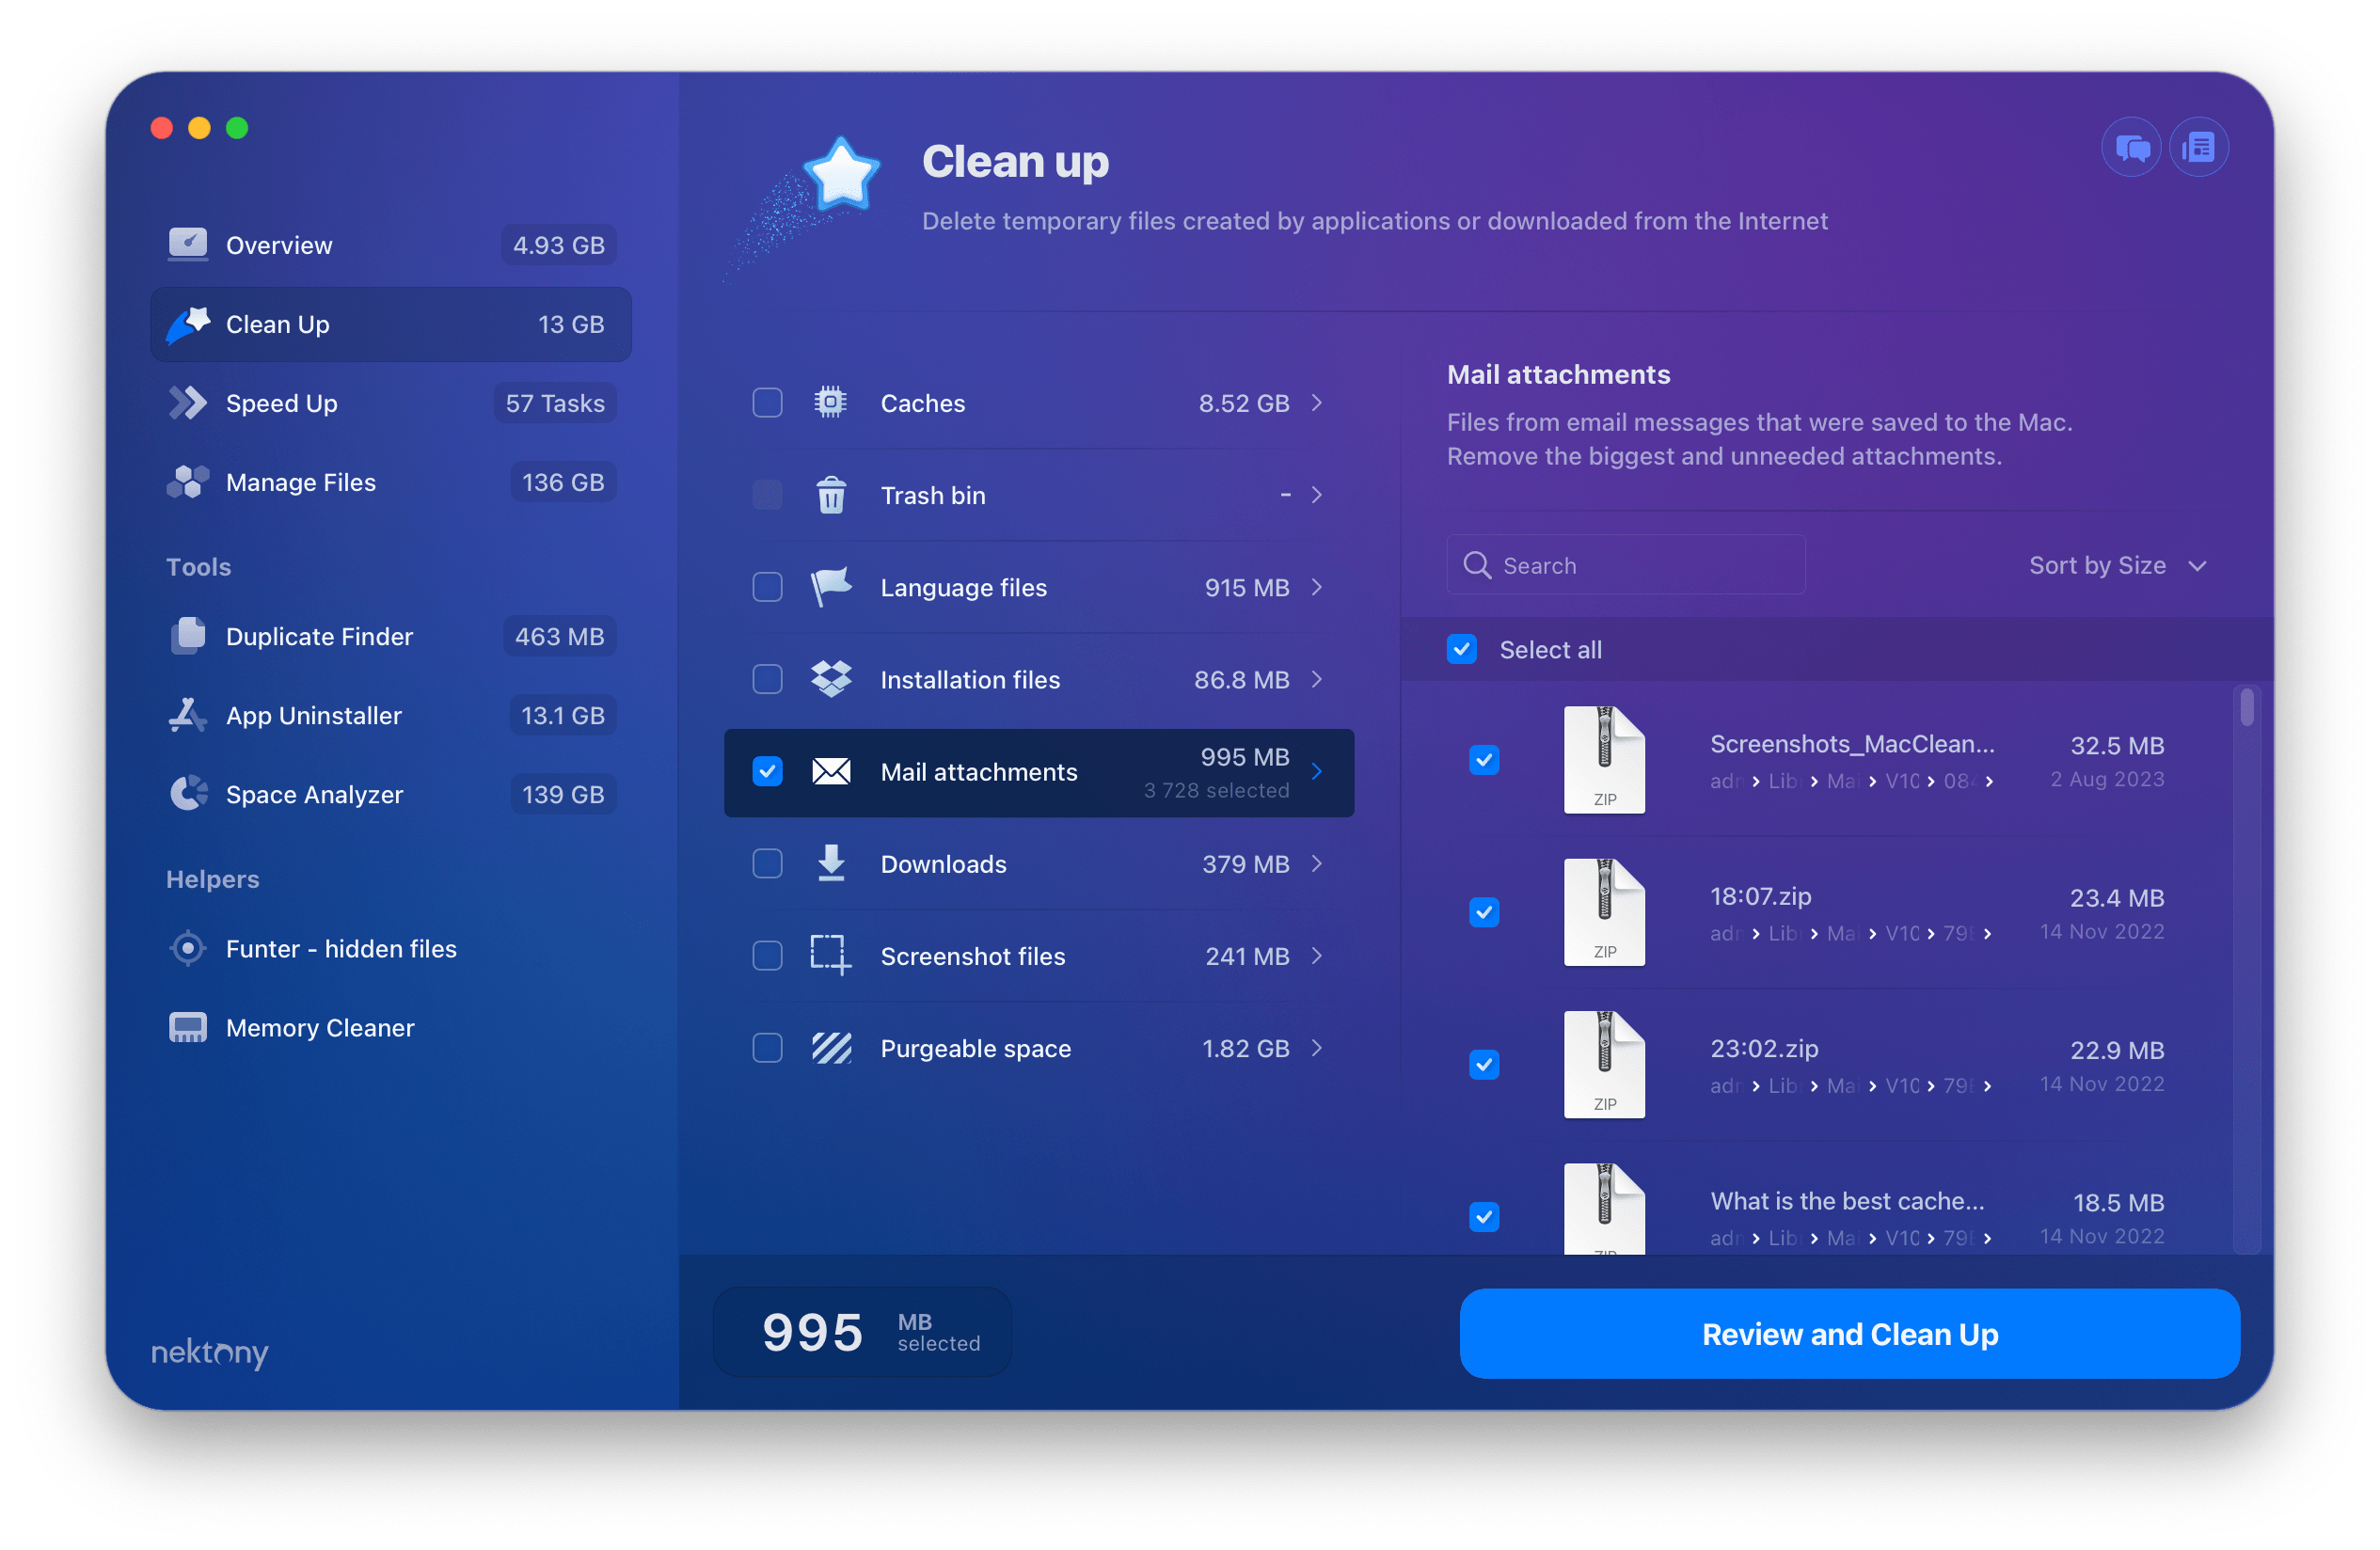 clean up mail attachments